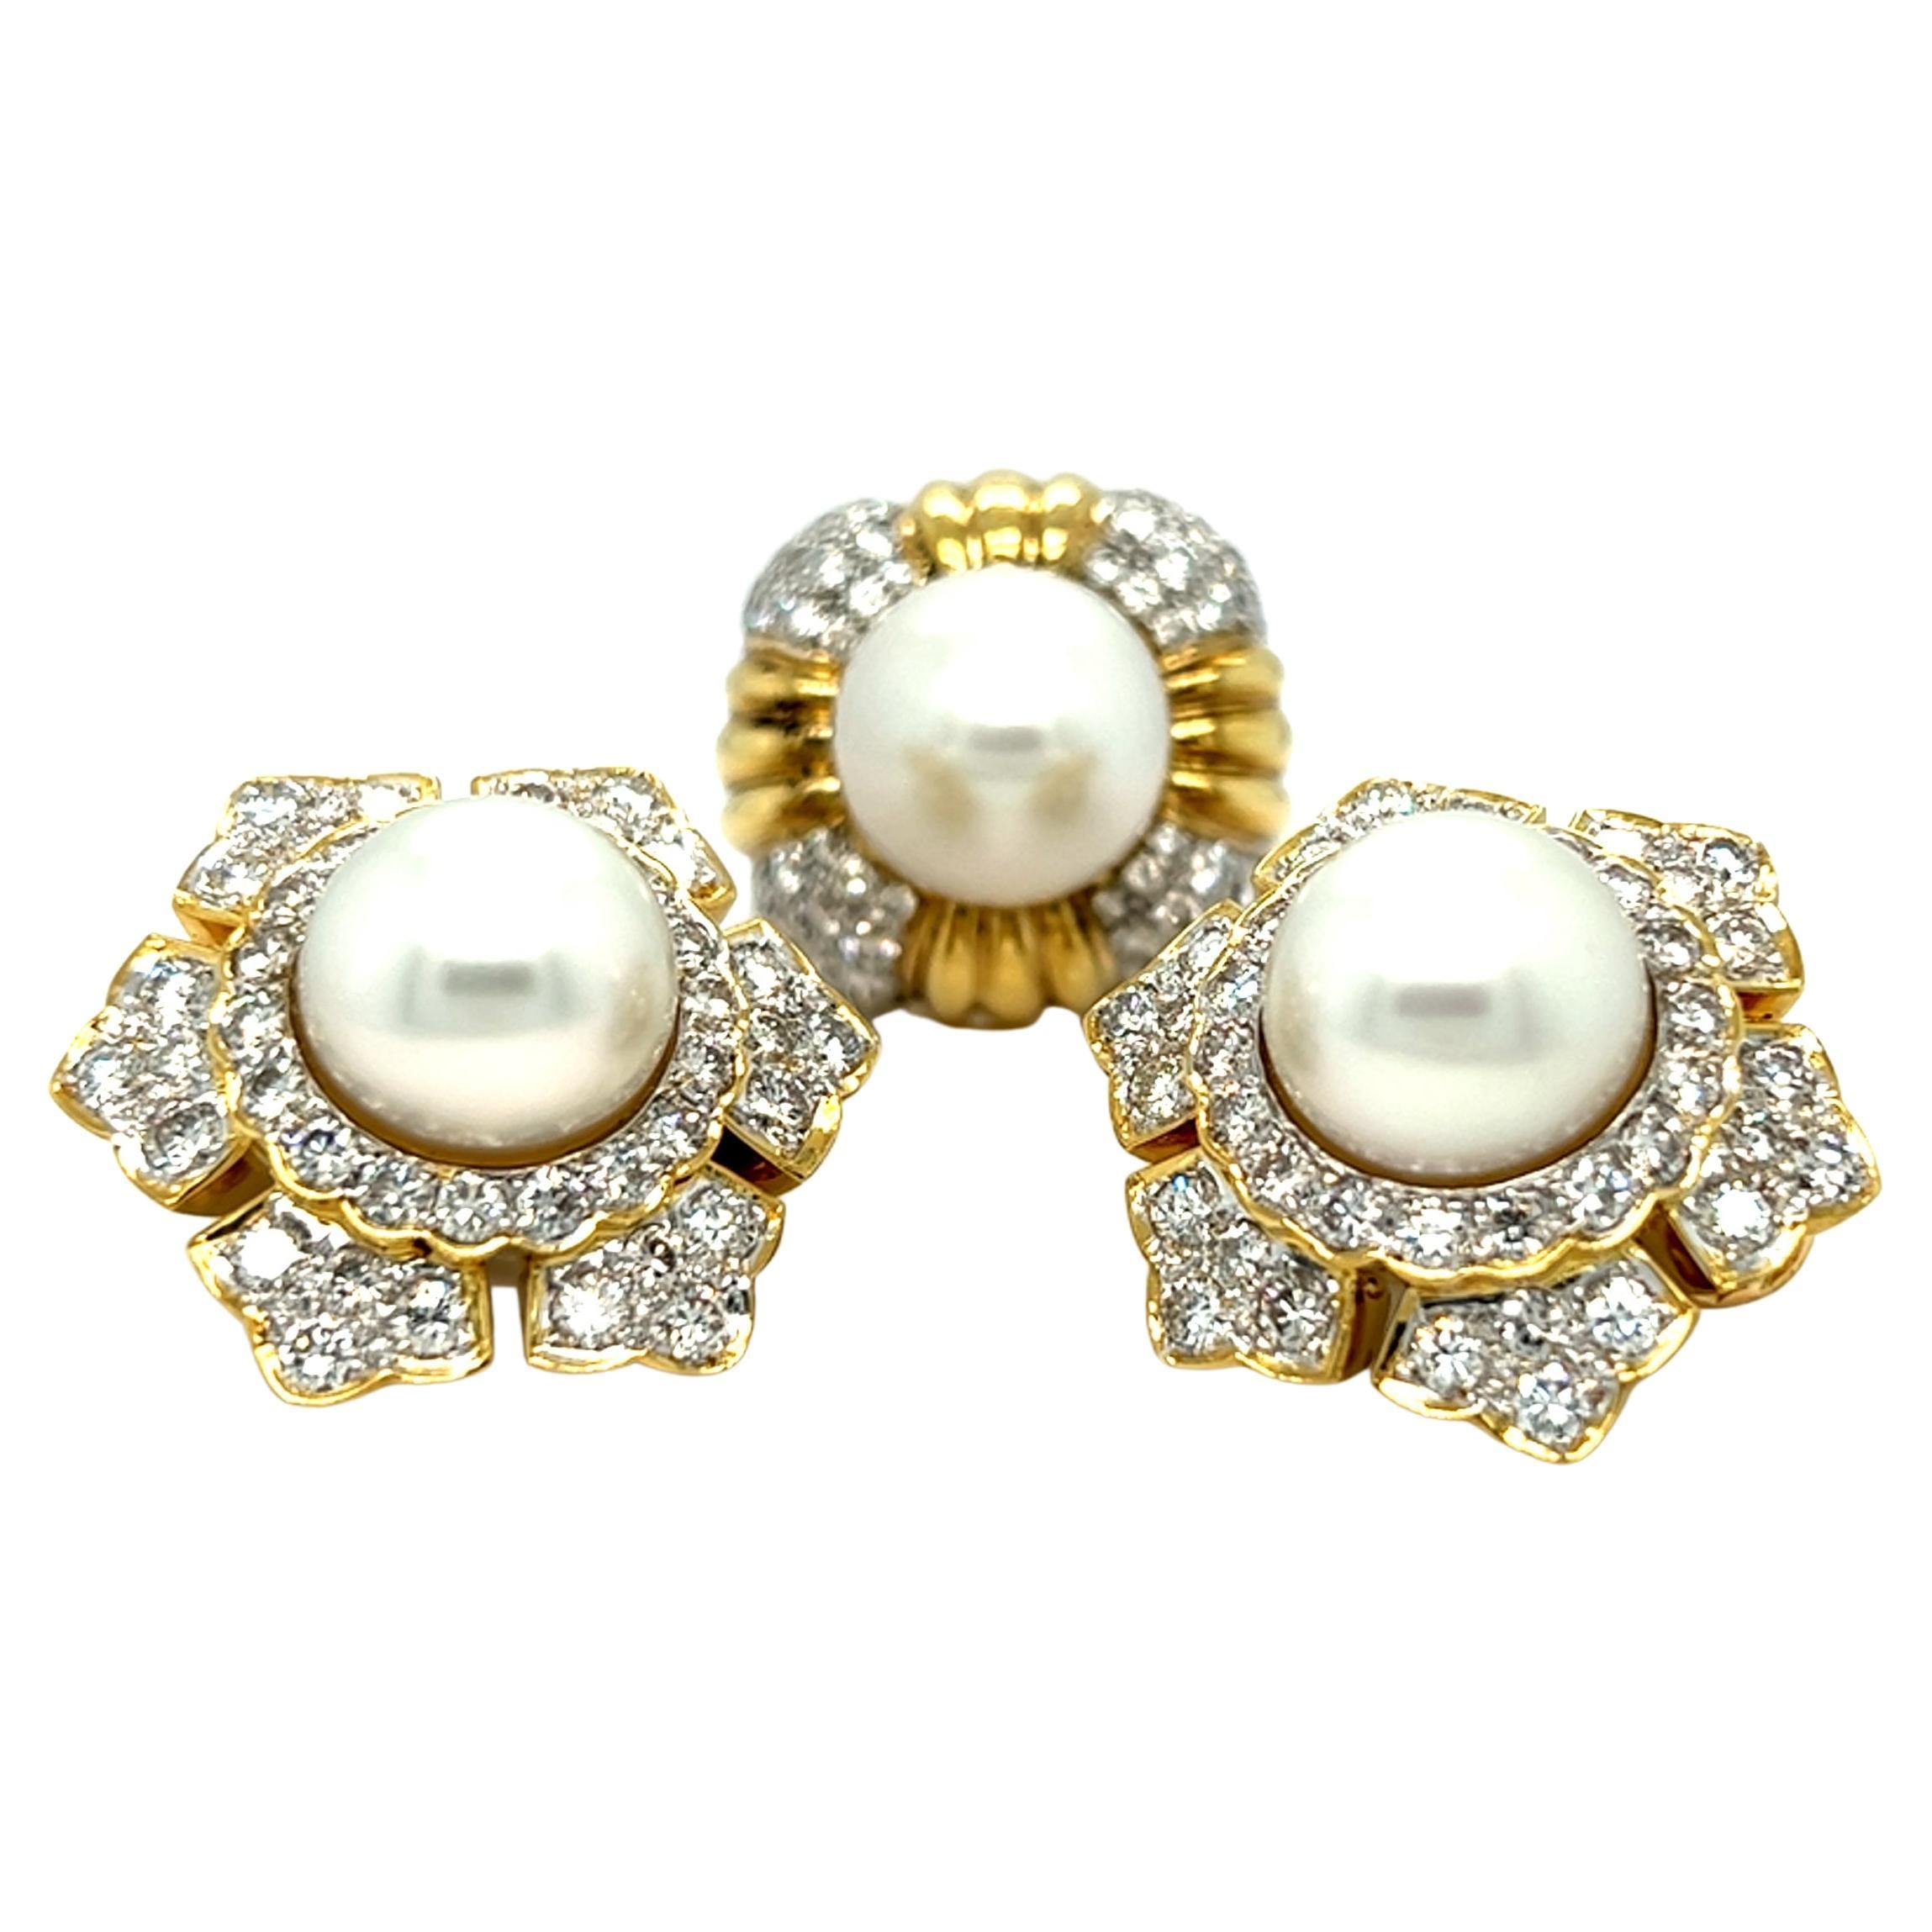 Estate Set of Pearl and Diamond Ring and Earrings Starburst 18k Yellow Gold